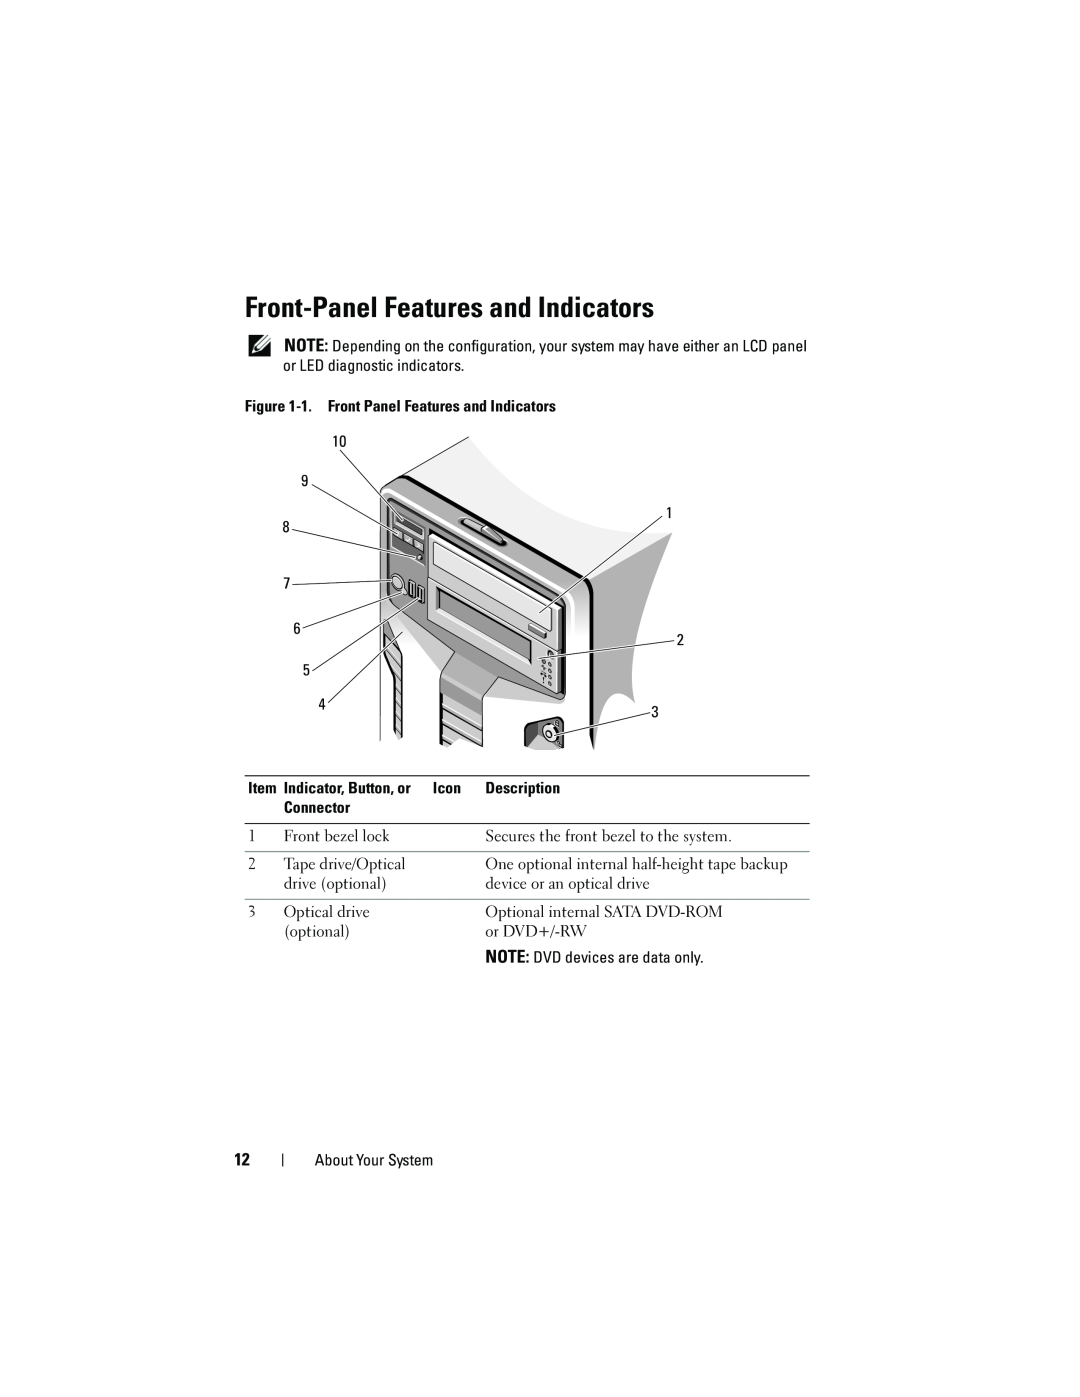 Dell T310 owner manual Front-Panel Features and Indicators, One optional internal half-height tape backup 